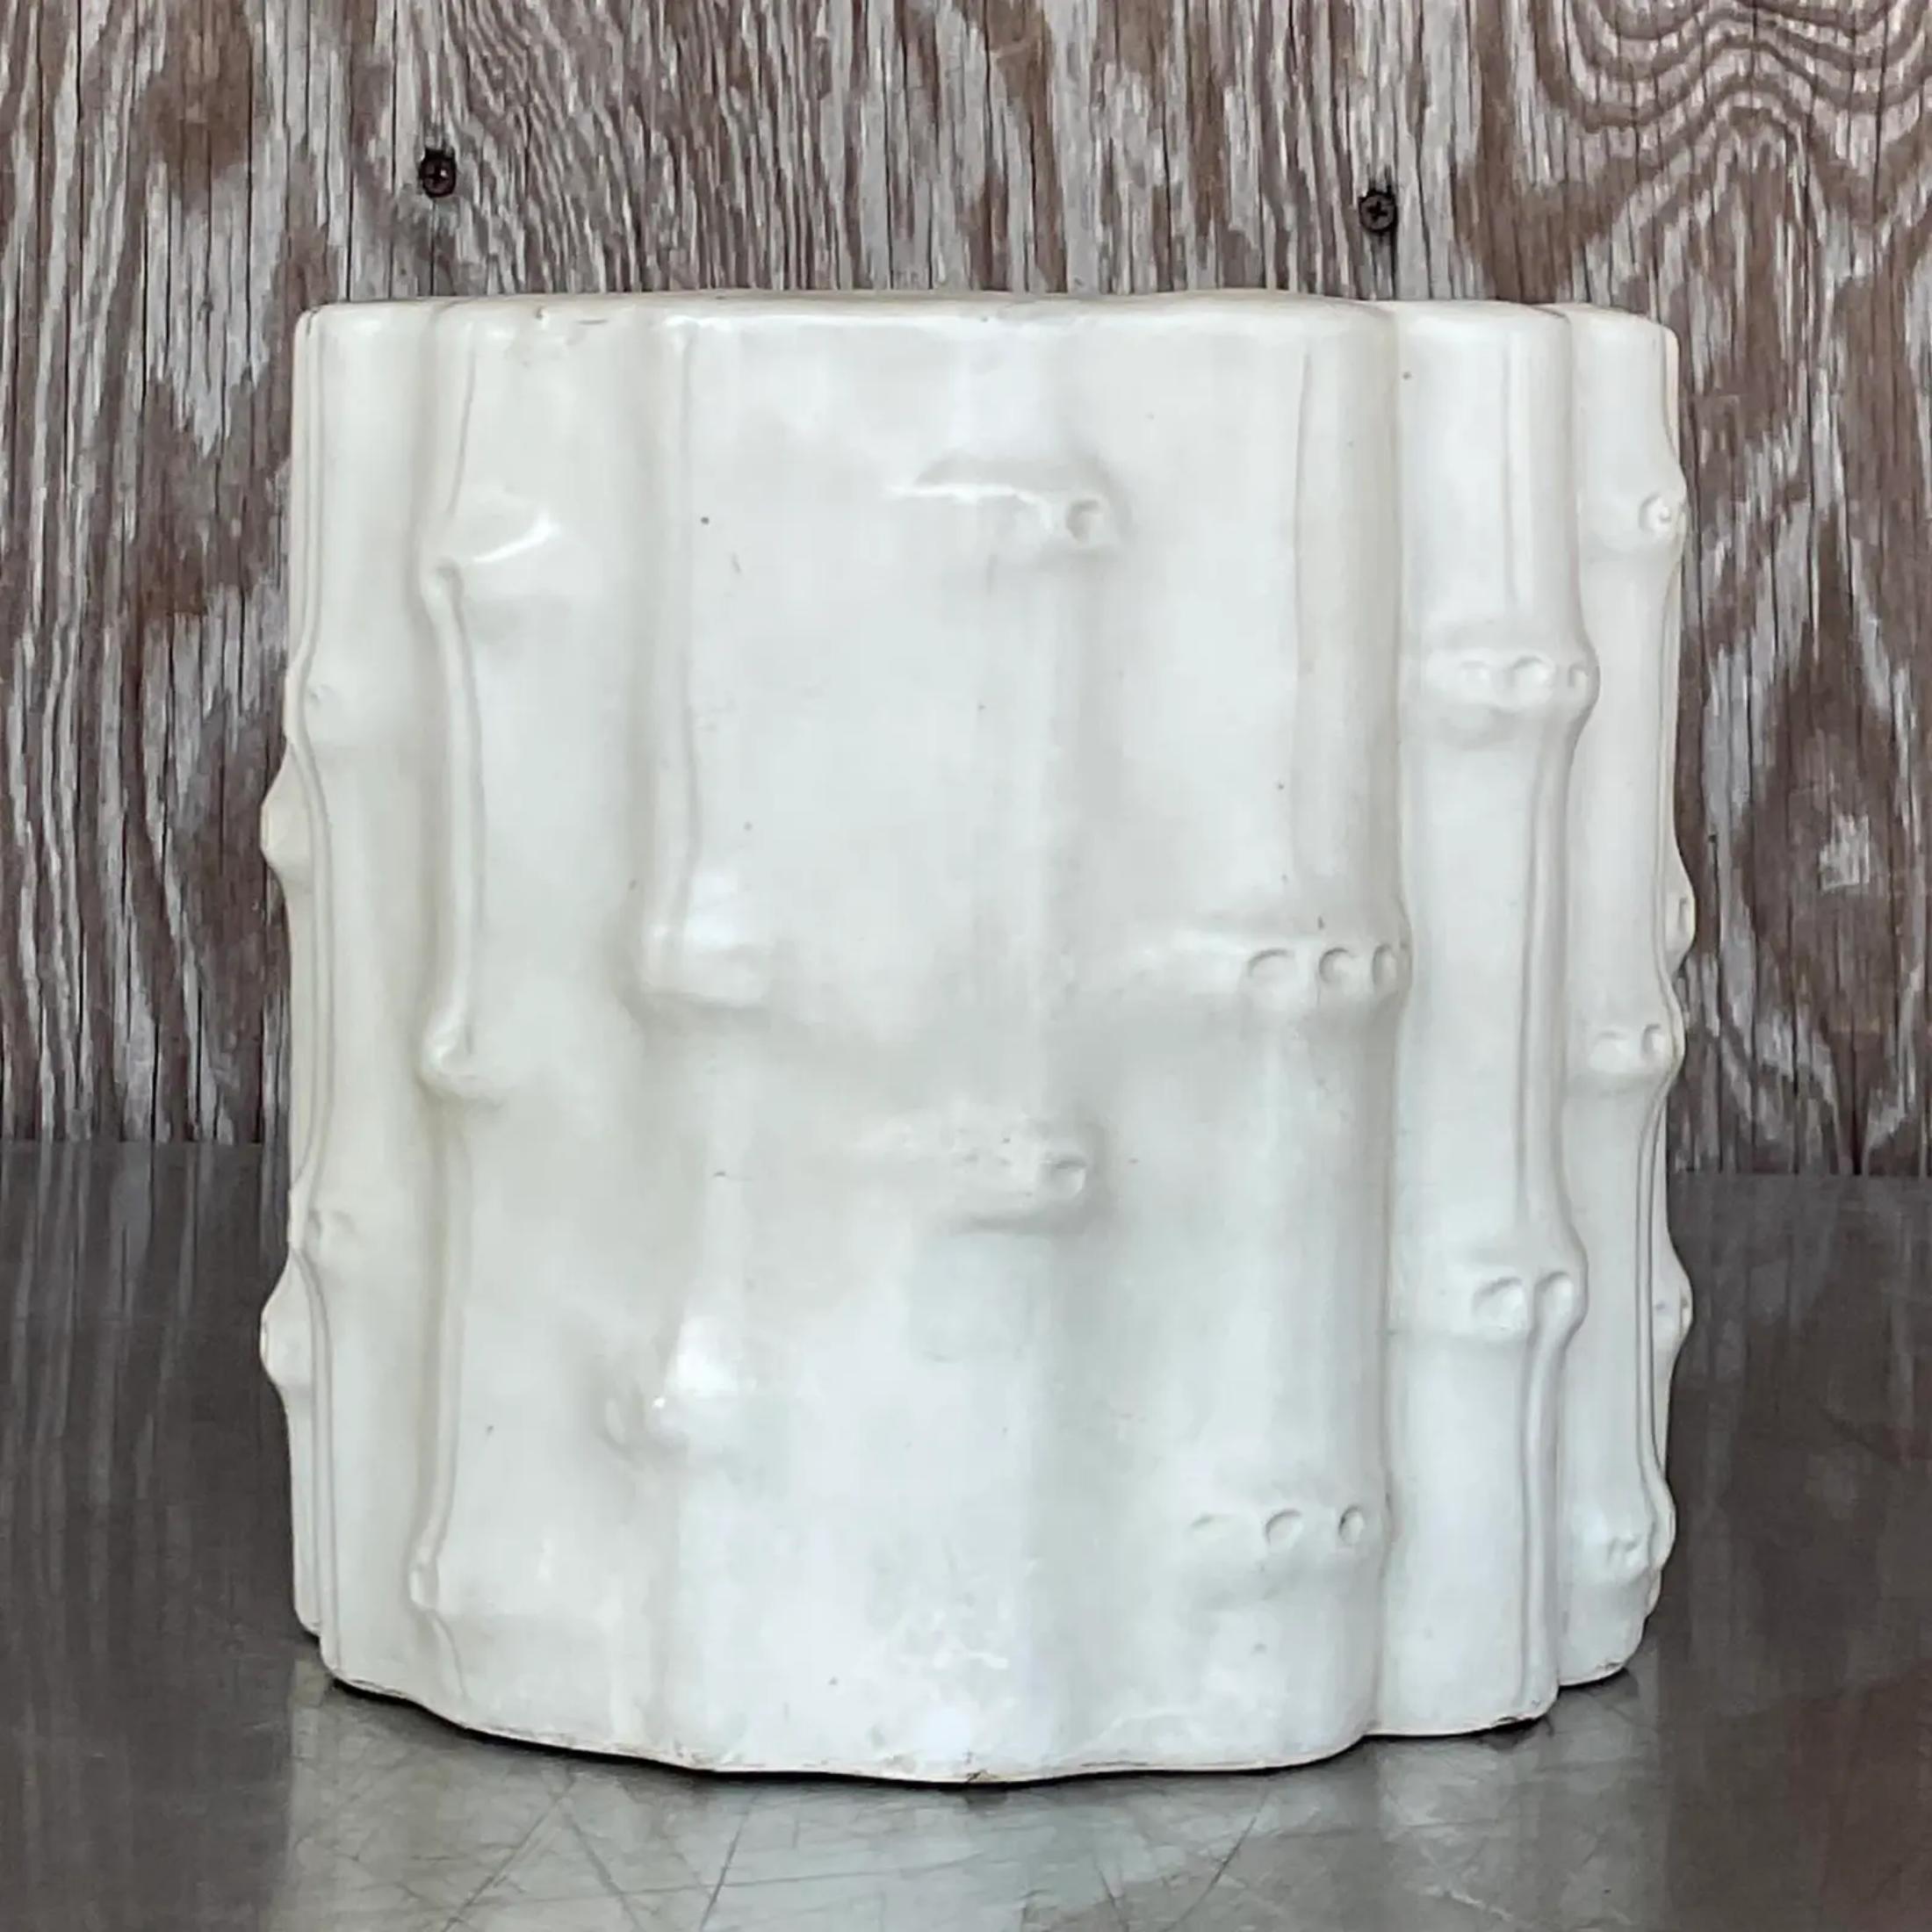 A fabulous vintage Coastal Cache pot. A chic off white glazed ceramic with a matte finish. Acquired from a Palm Beach estate